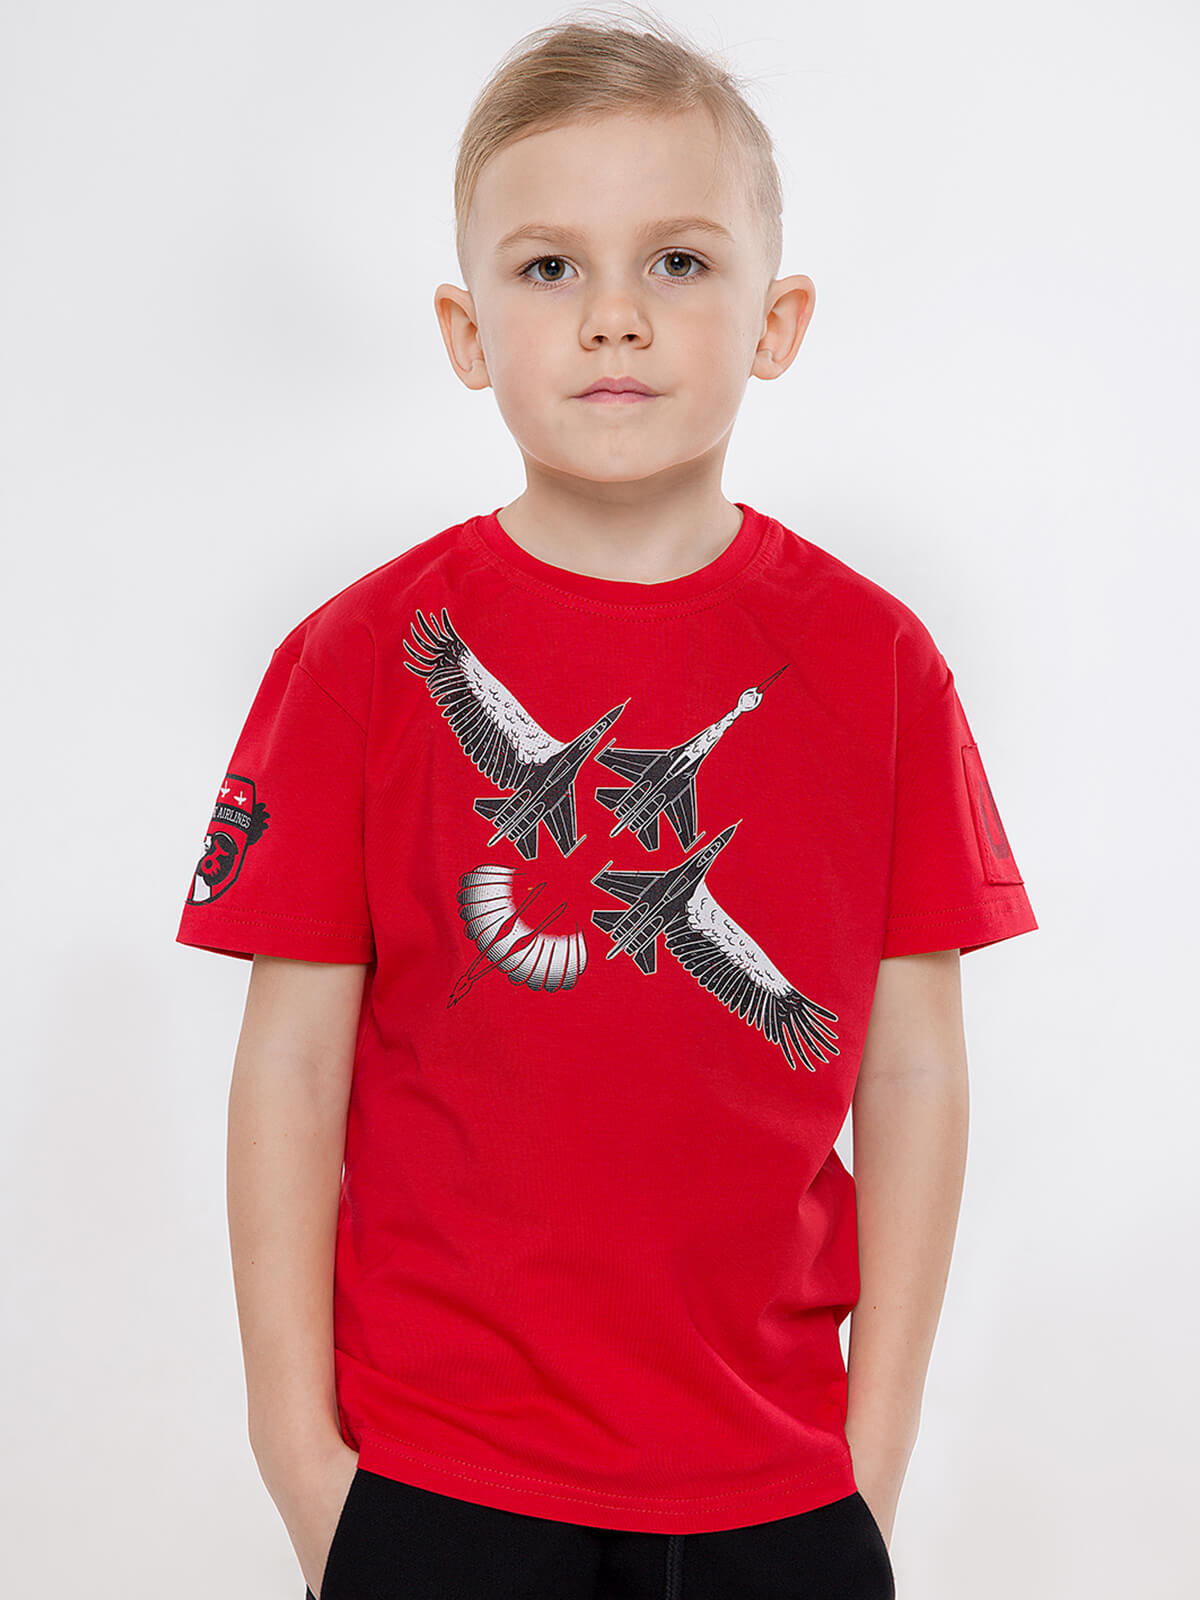 Kids T-Shirt Stork. Color red. T-shirt: unisex, well suited for both boys and girls.